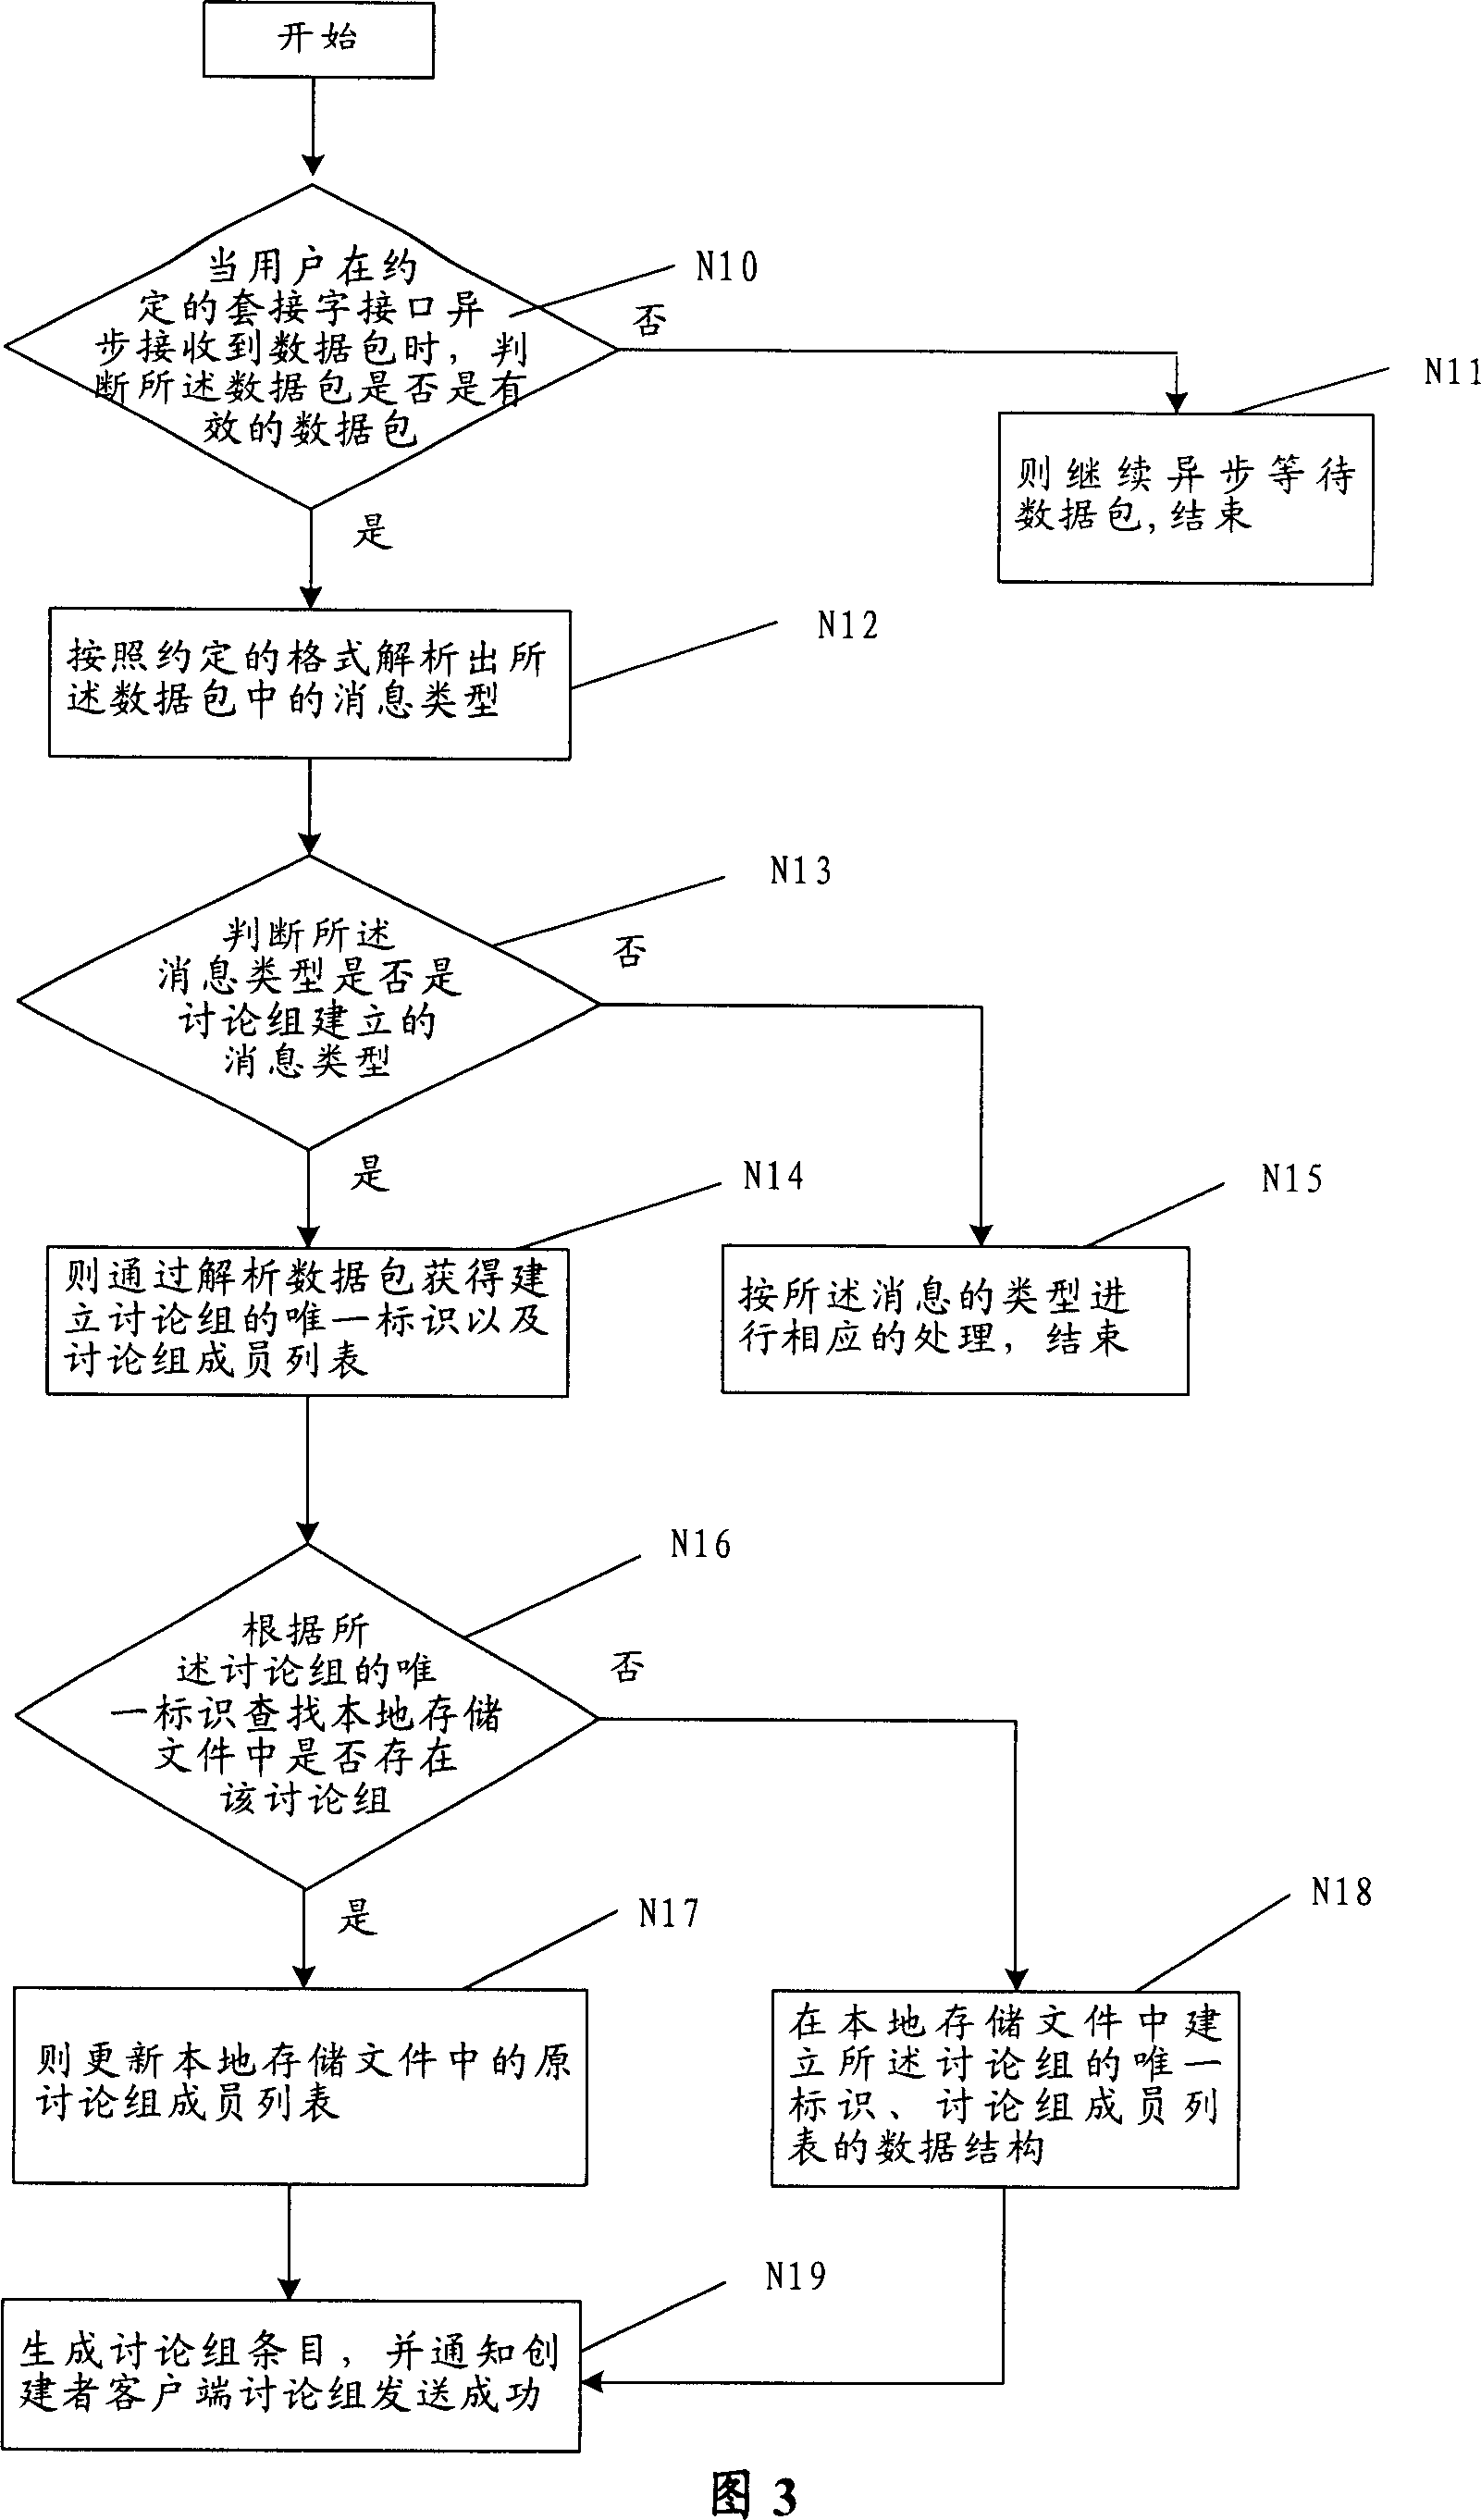 Method for set-up blogger and immediate communication of the blogger based on reciprocity mode